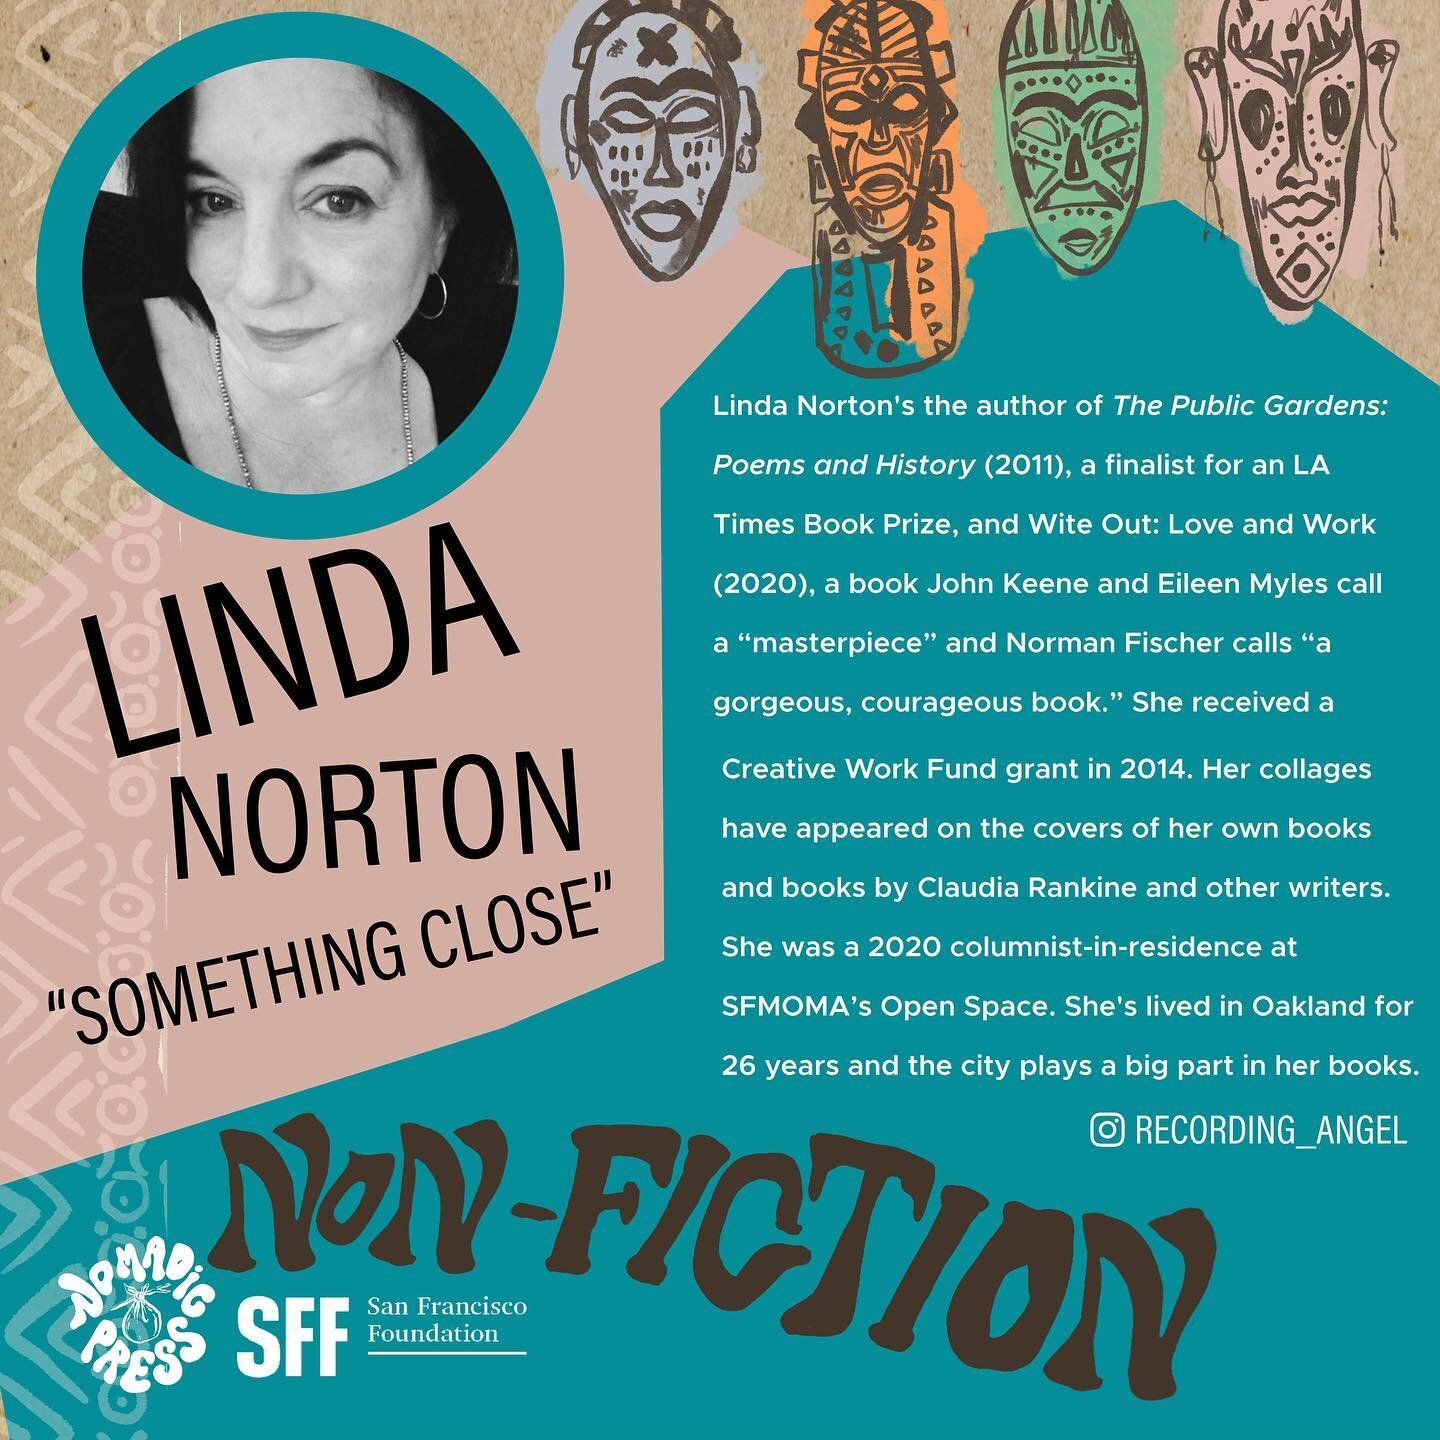 Congratulations to Linda Norton, recipient of the 2023 San Francisco Foundation/Nomadic Press Literary Award in Nonfiction. Linda won $5000 for &ldquo;Something Close&rdquo; excerpted from a longer memoir book manuscript. Post your congratulations to